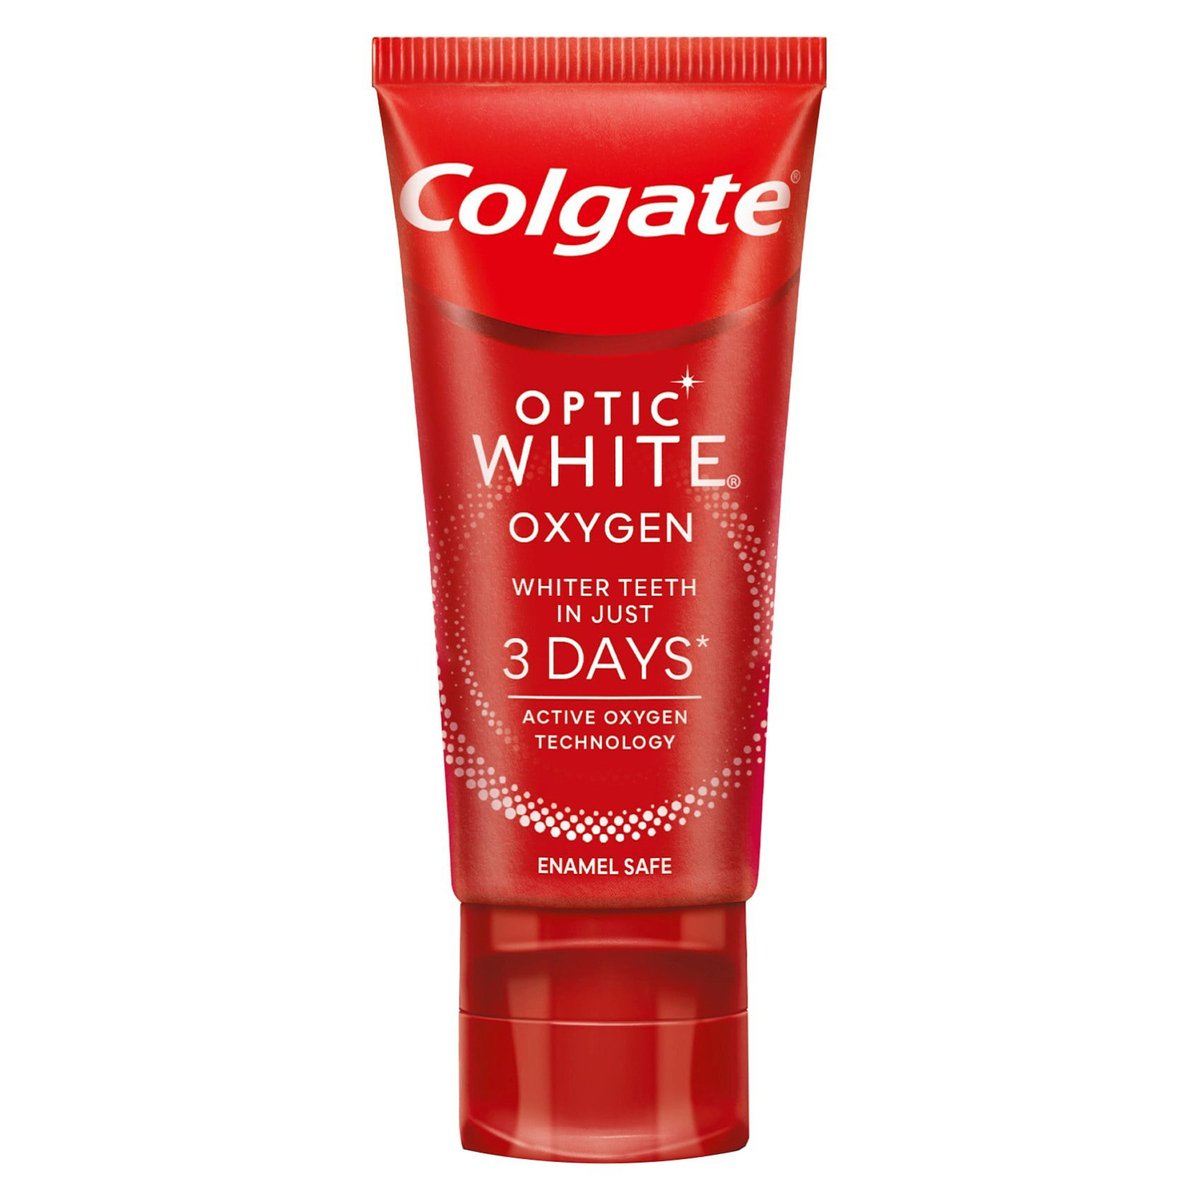 Colgate Optic White Oxygen Toothpaste Value Pack 50 ml